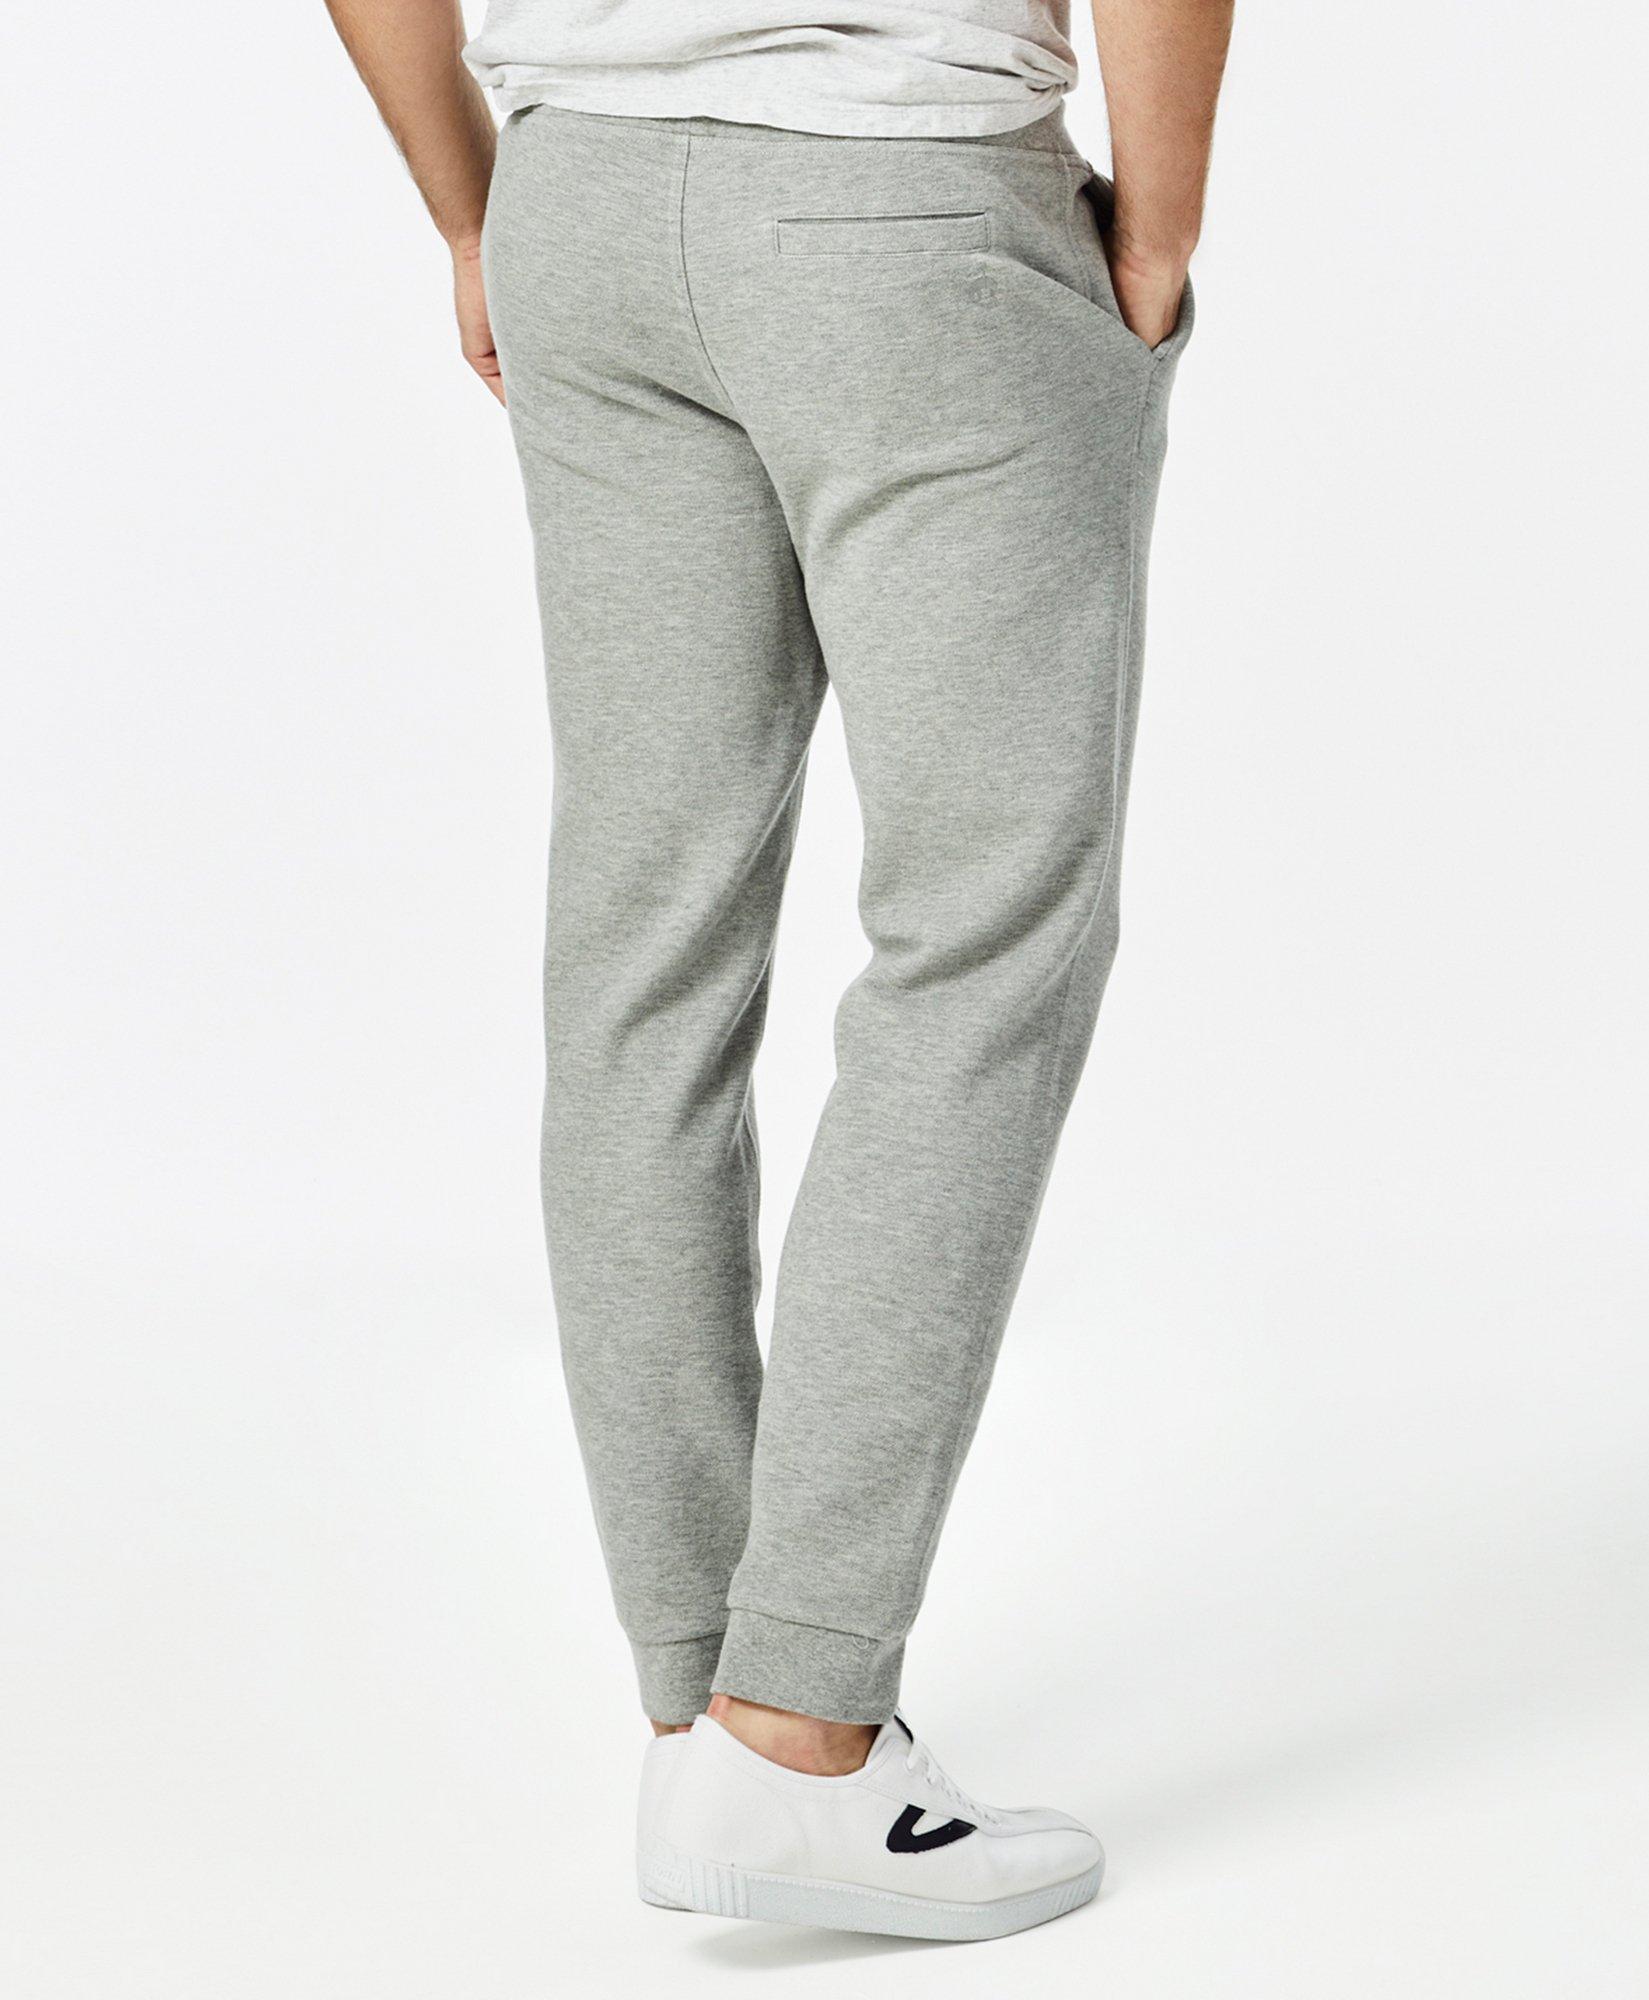 Do you tie the drawstrings on your sweatpants/joggers or leave